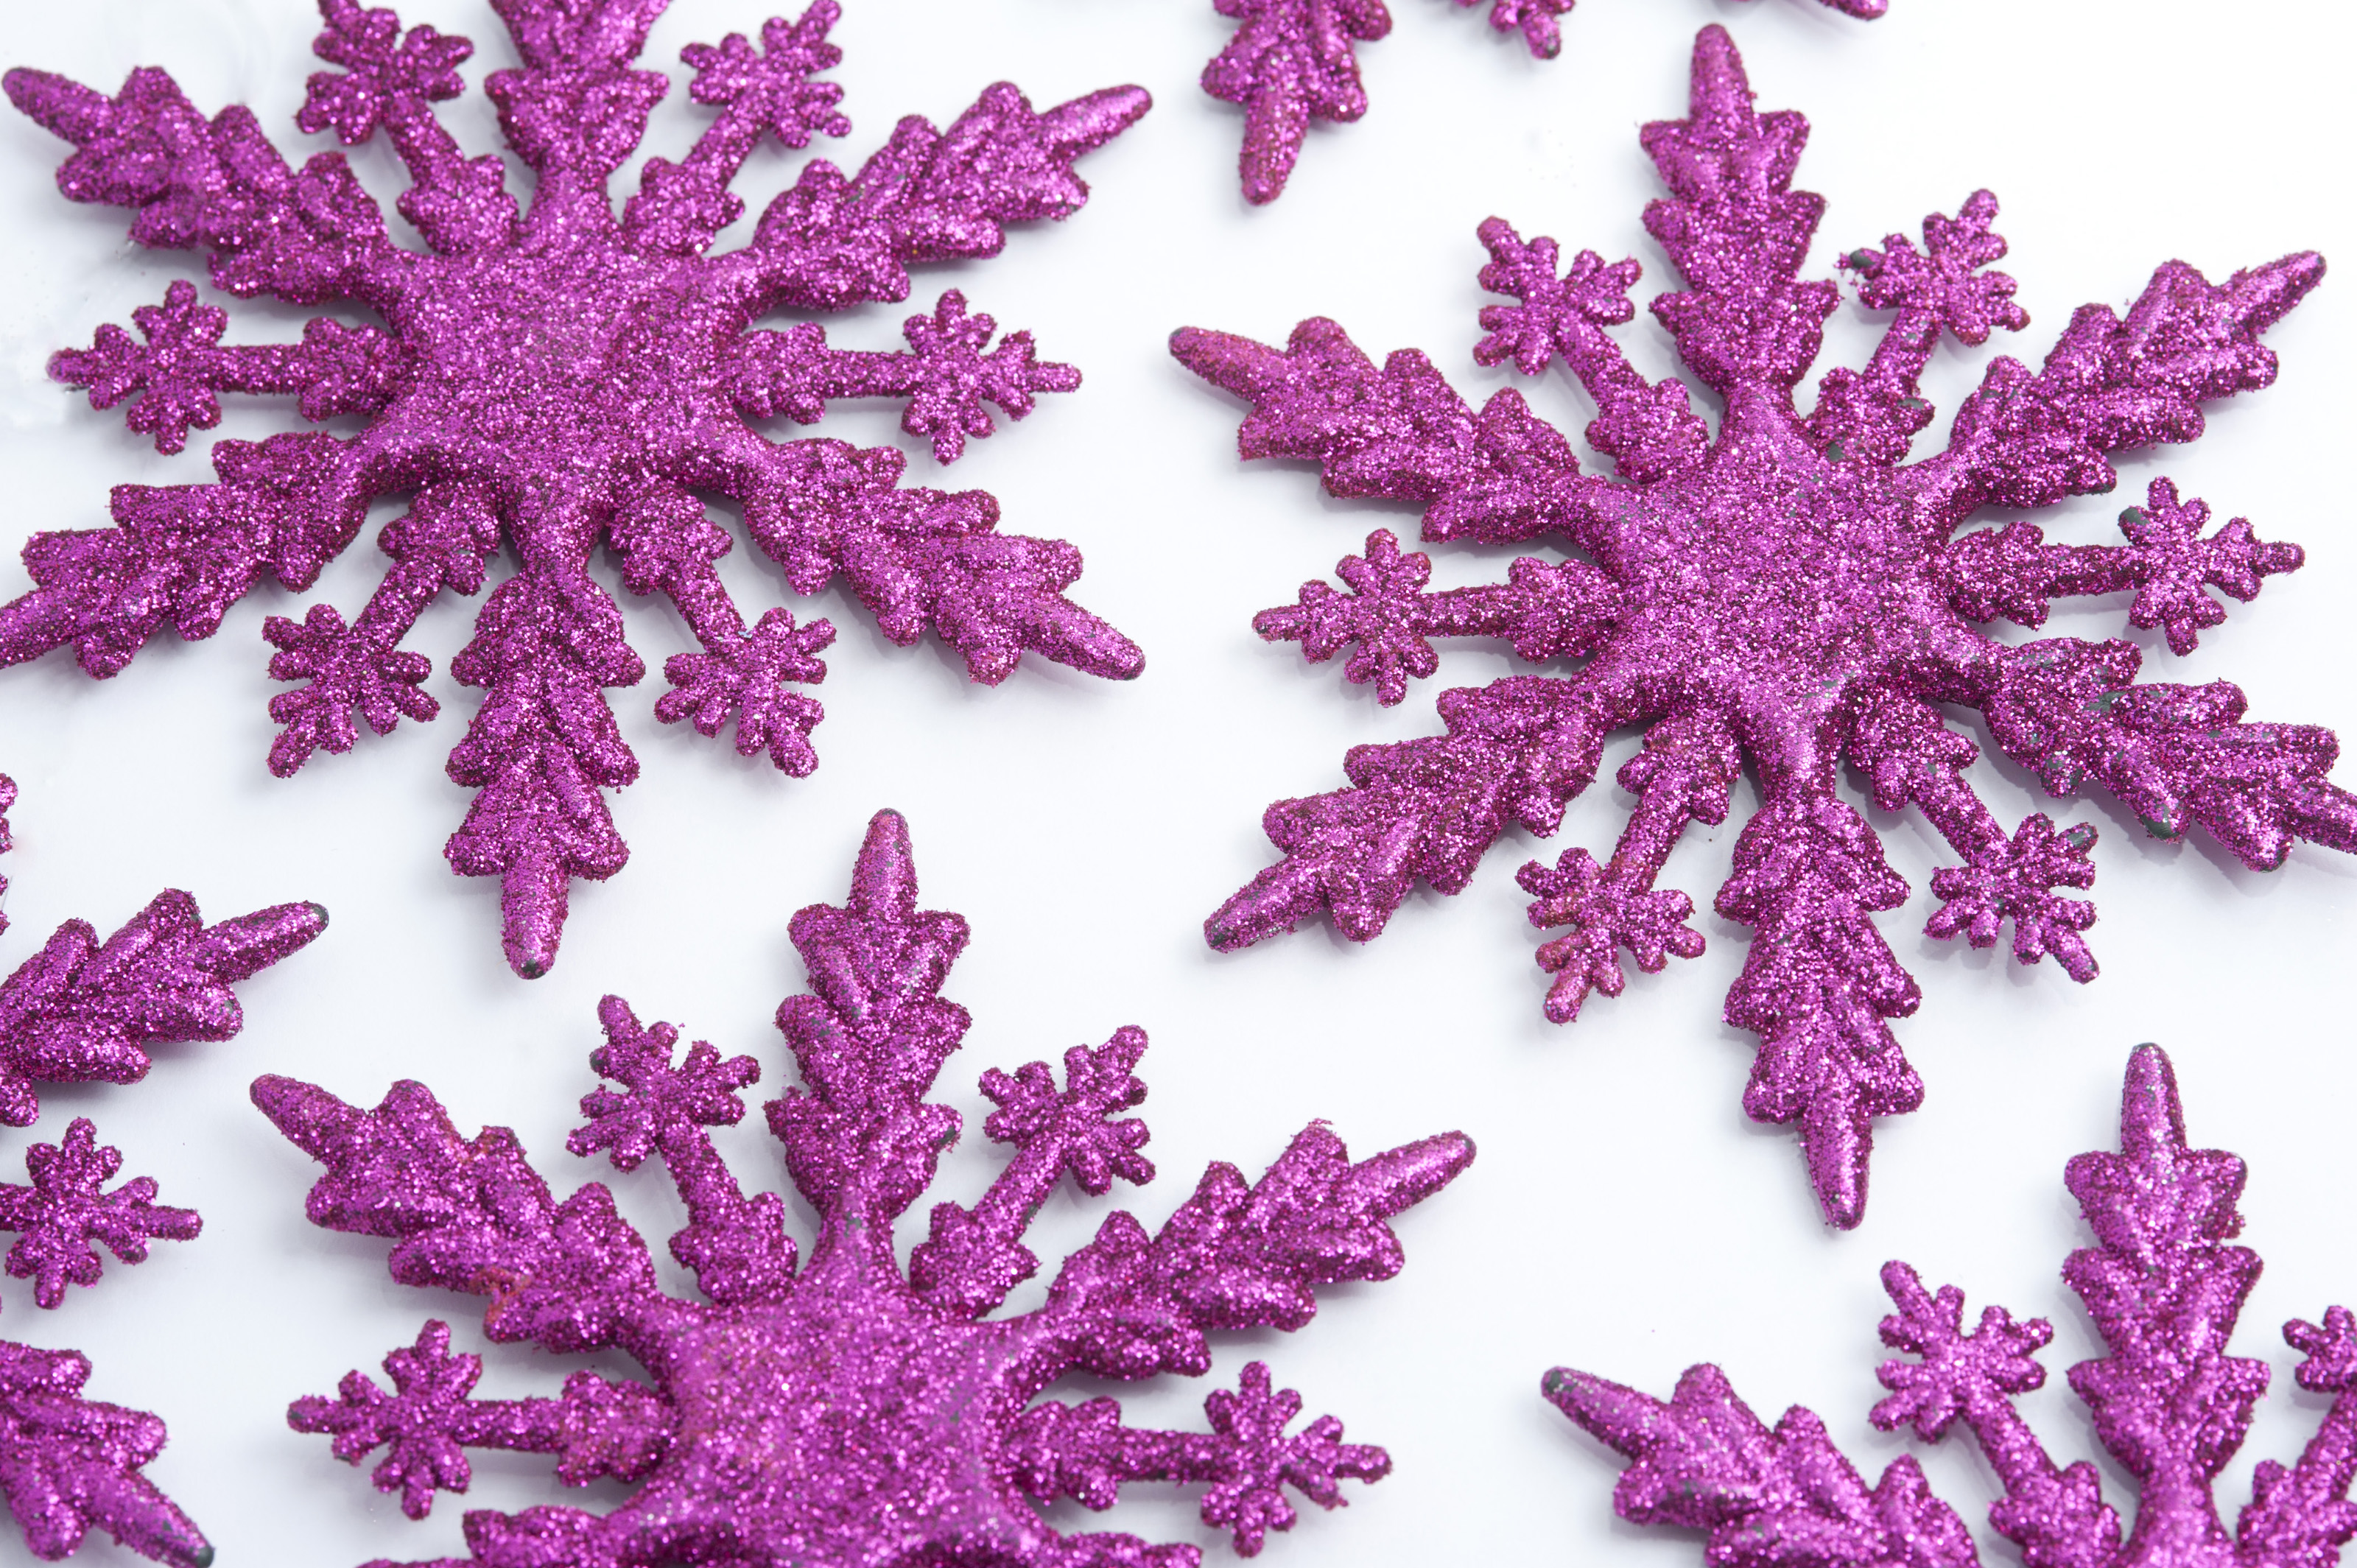 Pink glitter snowflakes-6346 | Stockarch Free Stock Photo Archive